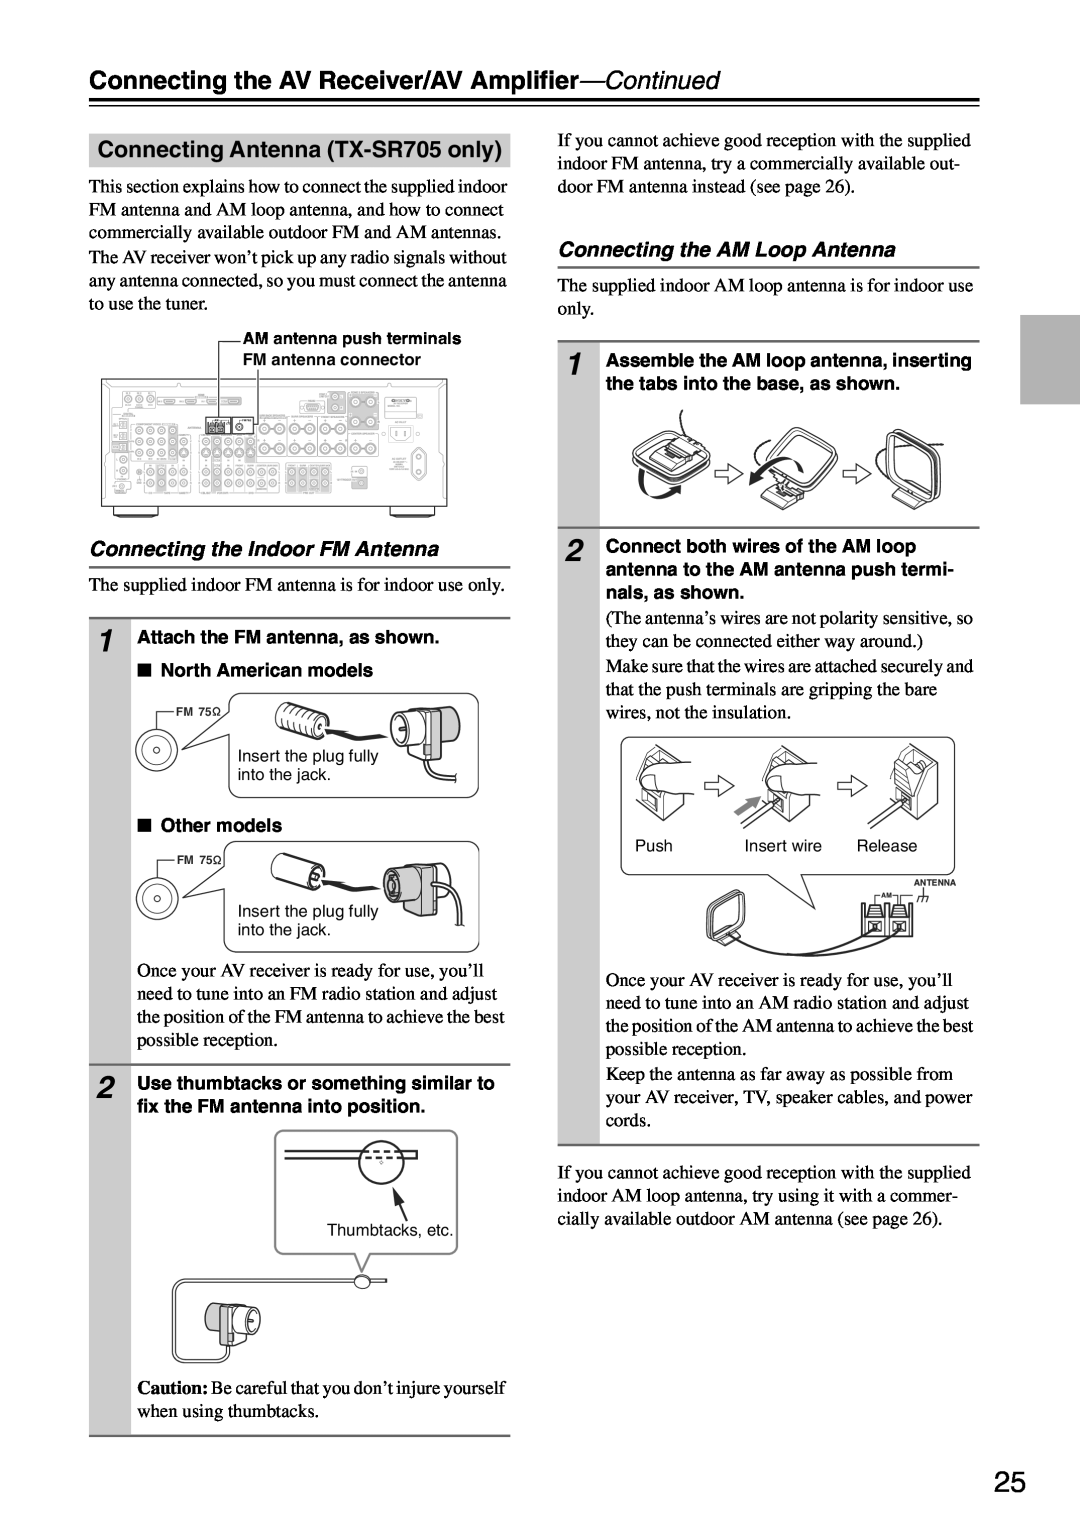 Onkyo TX-SA705 instruction manual Connecting the AV Receiver/AV Amplifier—Continued, Connecting Antenna TX-SR705only 